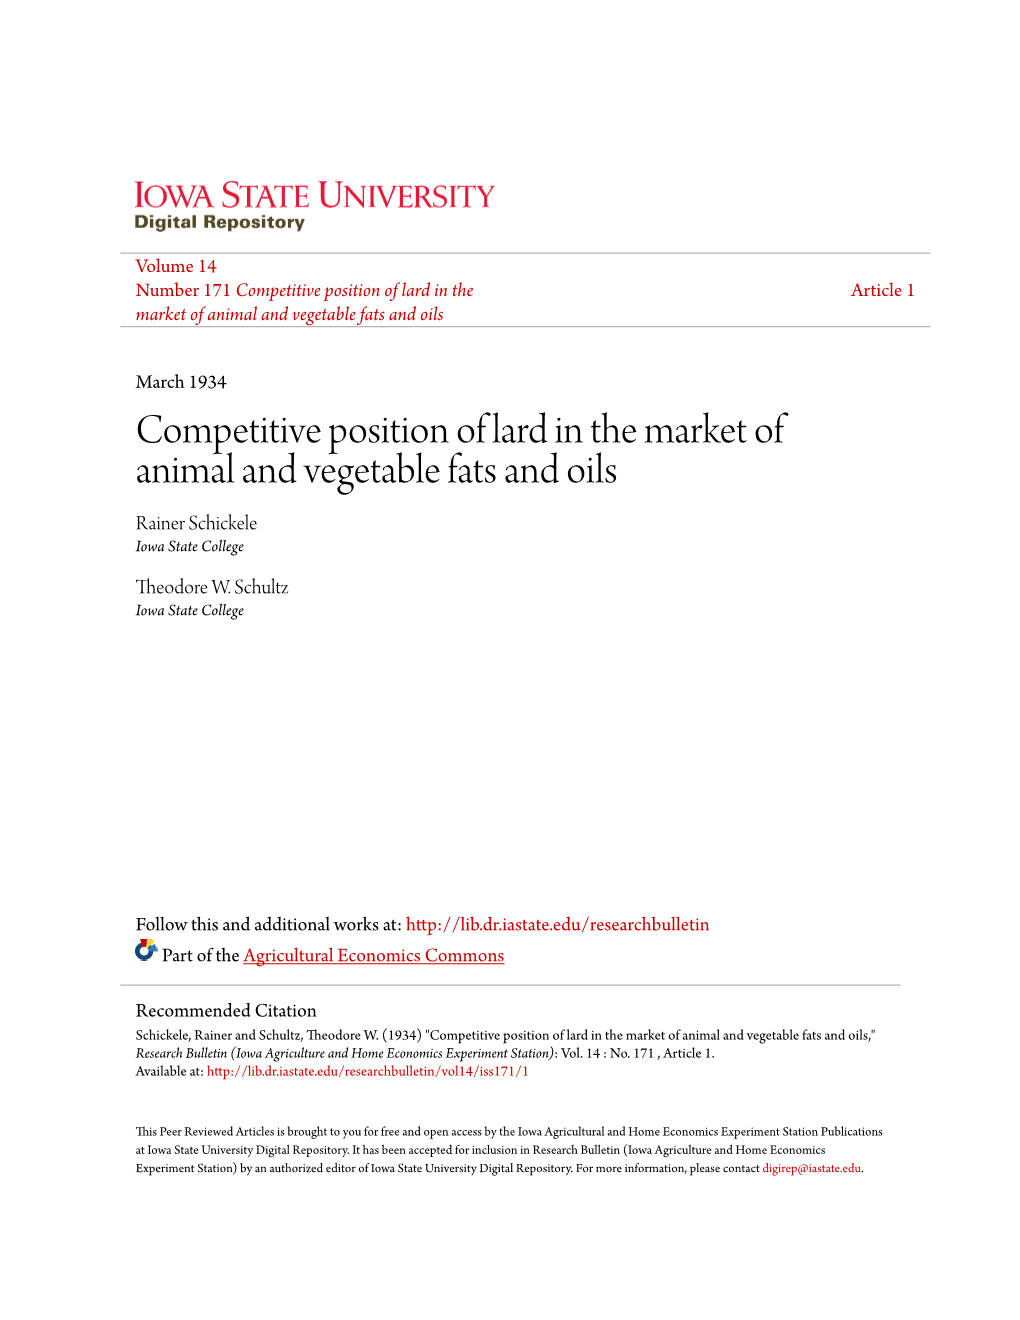 Competitive Position of Lard in the Market of Animal and Vegetable Fats and Oils Rainer Schickele Iowa State College